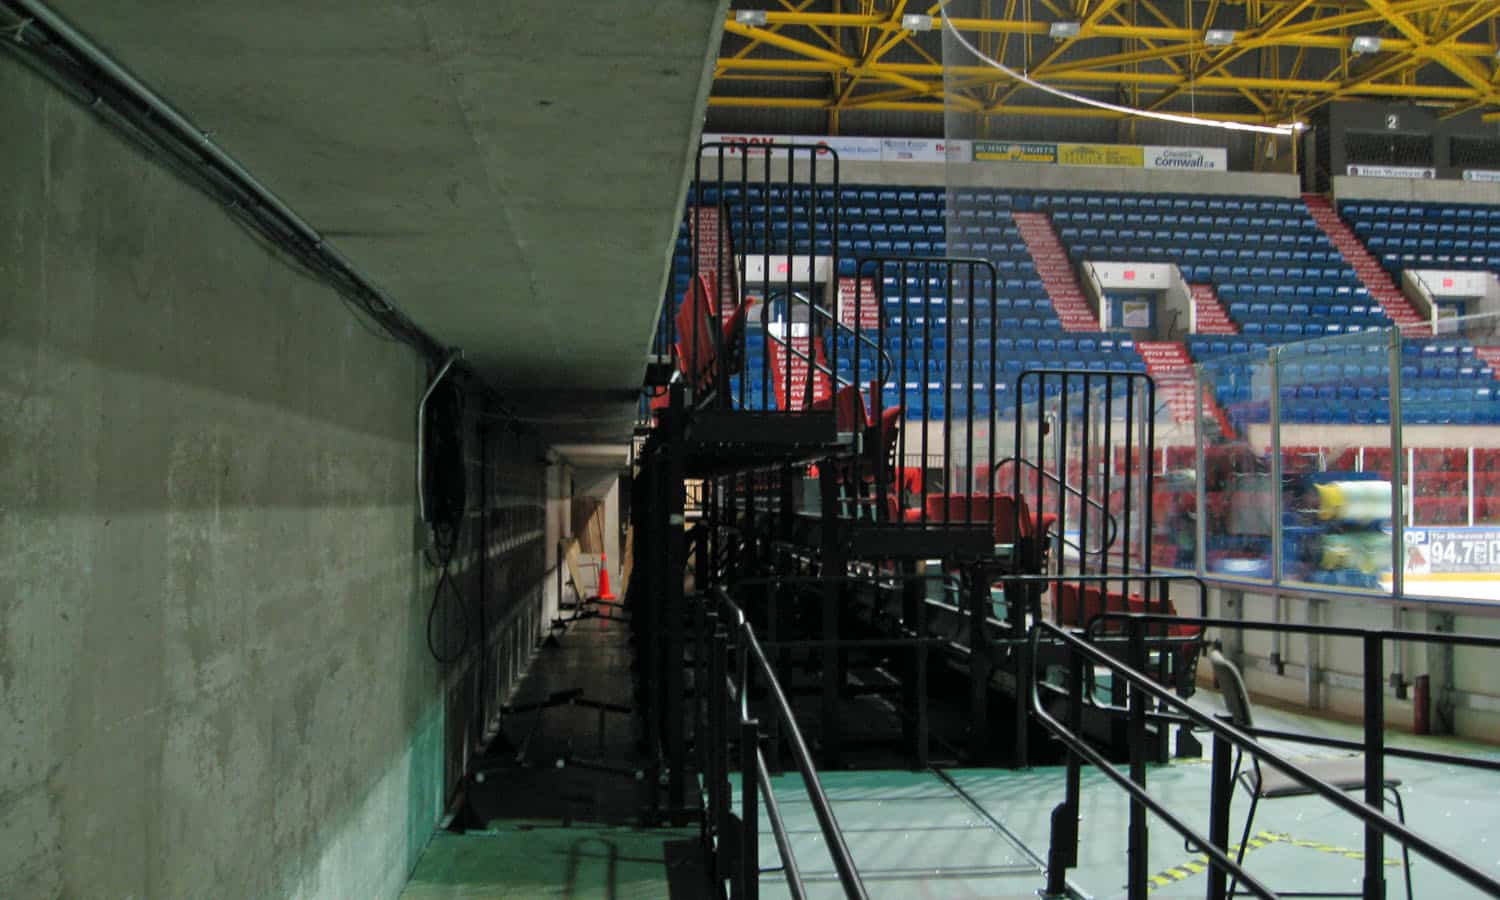 Detail of the moat seating showing the space between the ice surface and the main seating